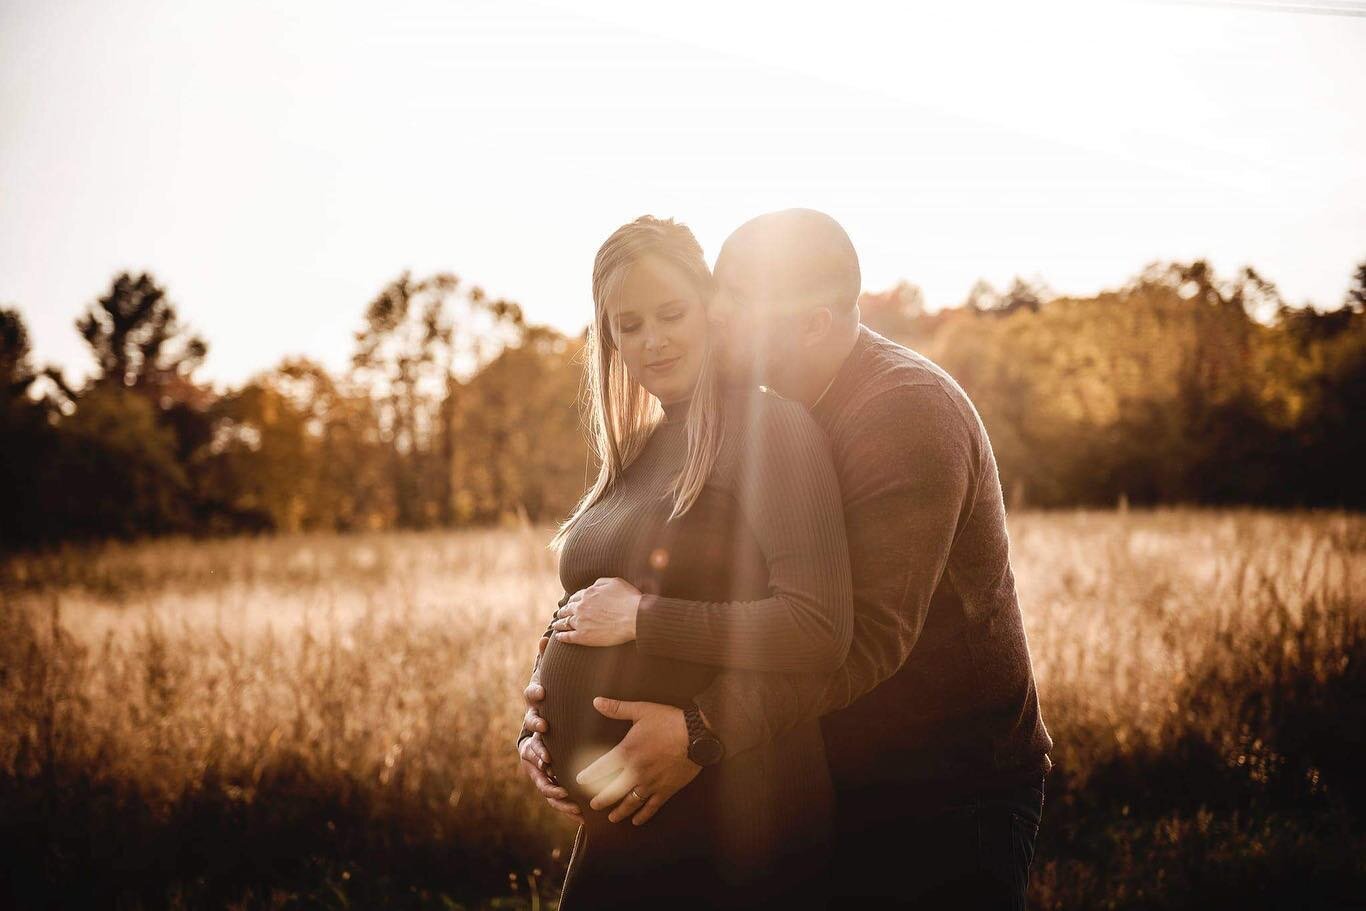 I adored this maternity session. So much love between these souls. Thx @amy_rancourt &amp; fam